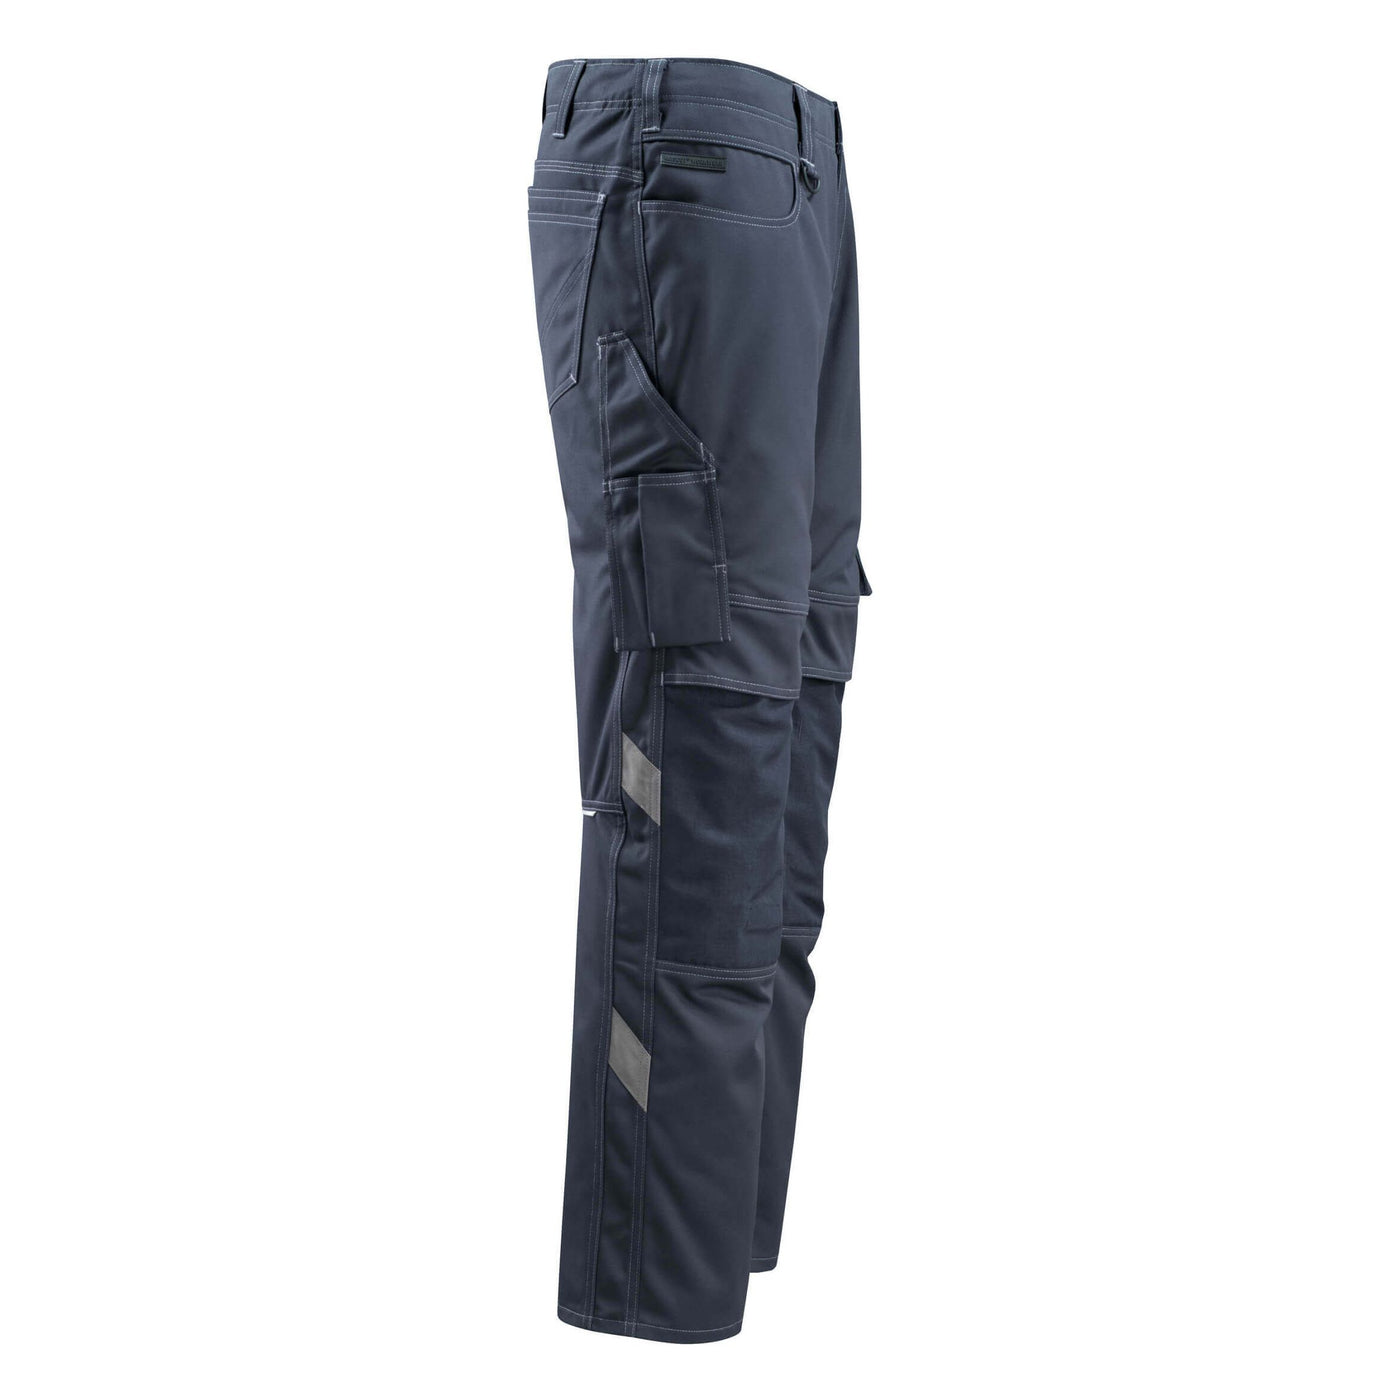 Mascot Workwear Trousers Accelerate 18531 – Navy – PAM Ties Limited |  Basement Waterproofing And Damp Proofing